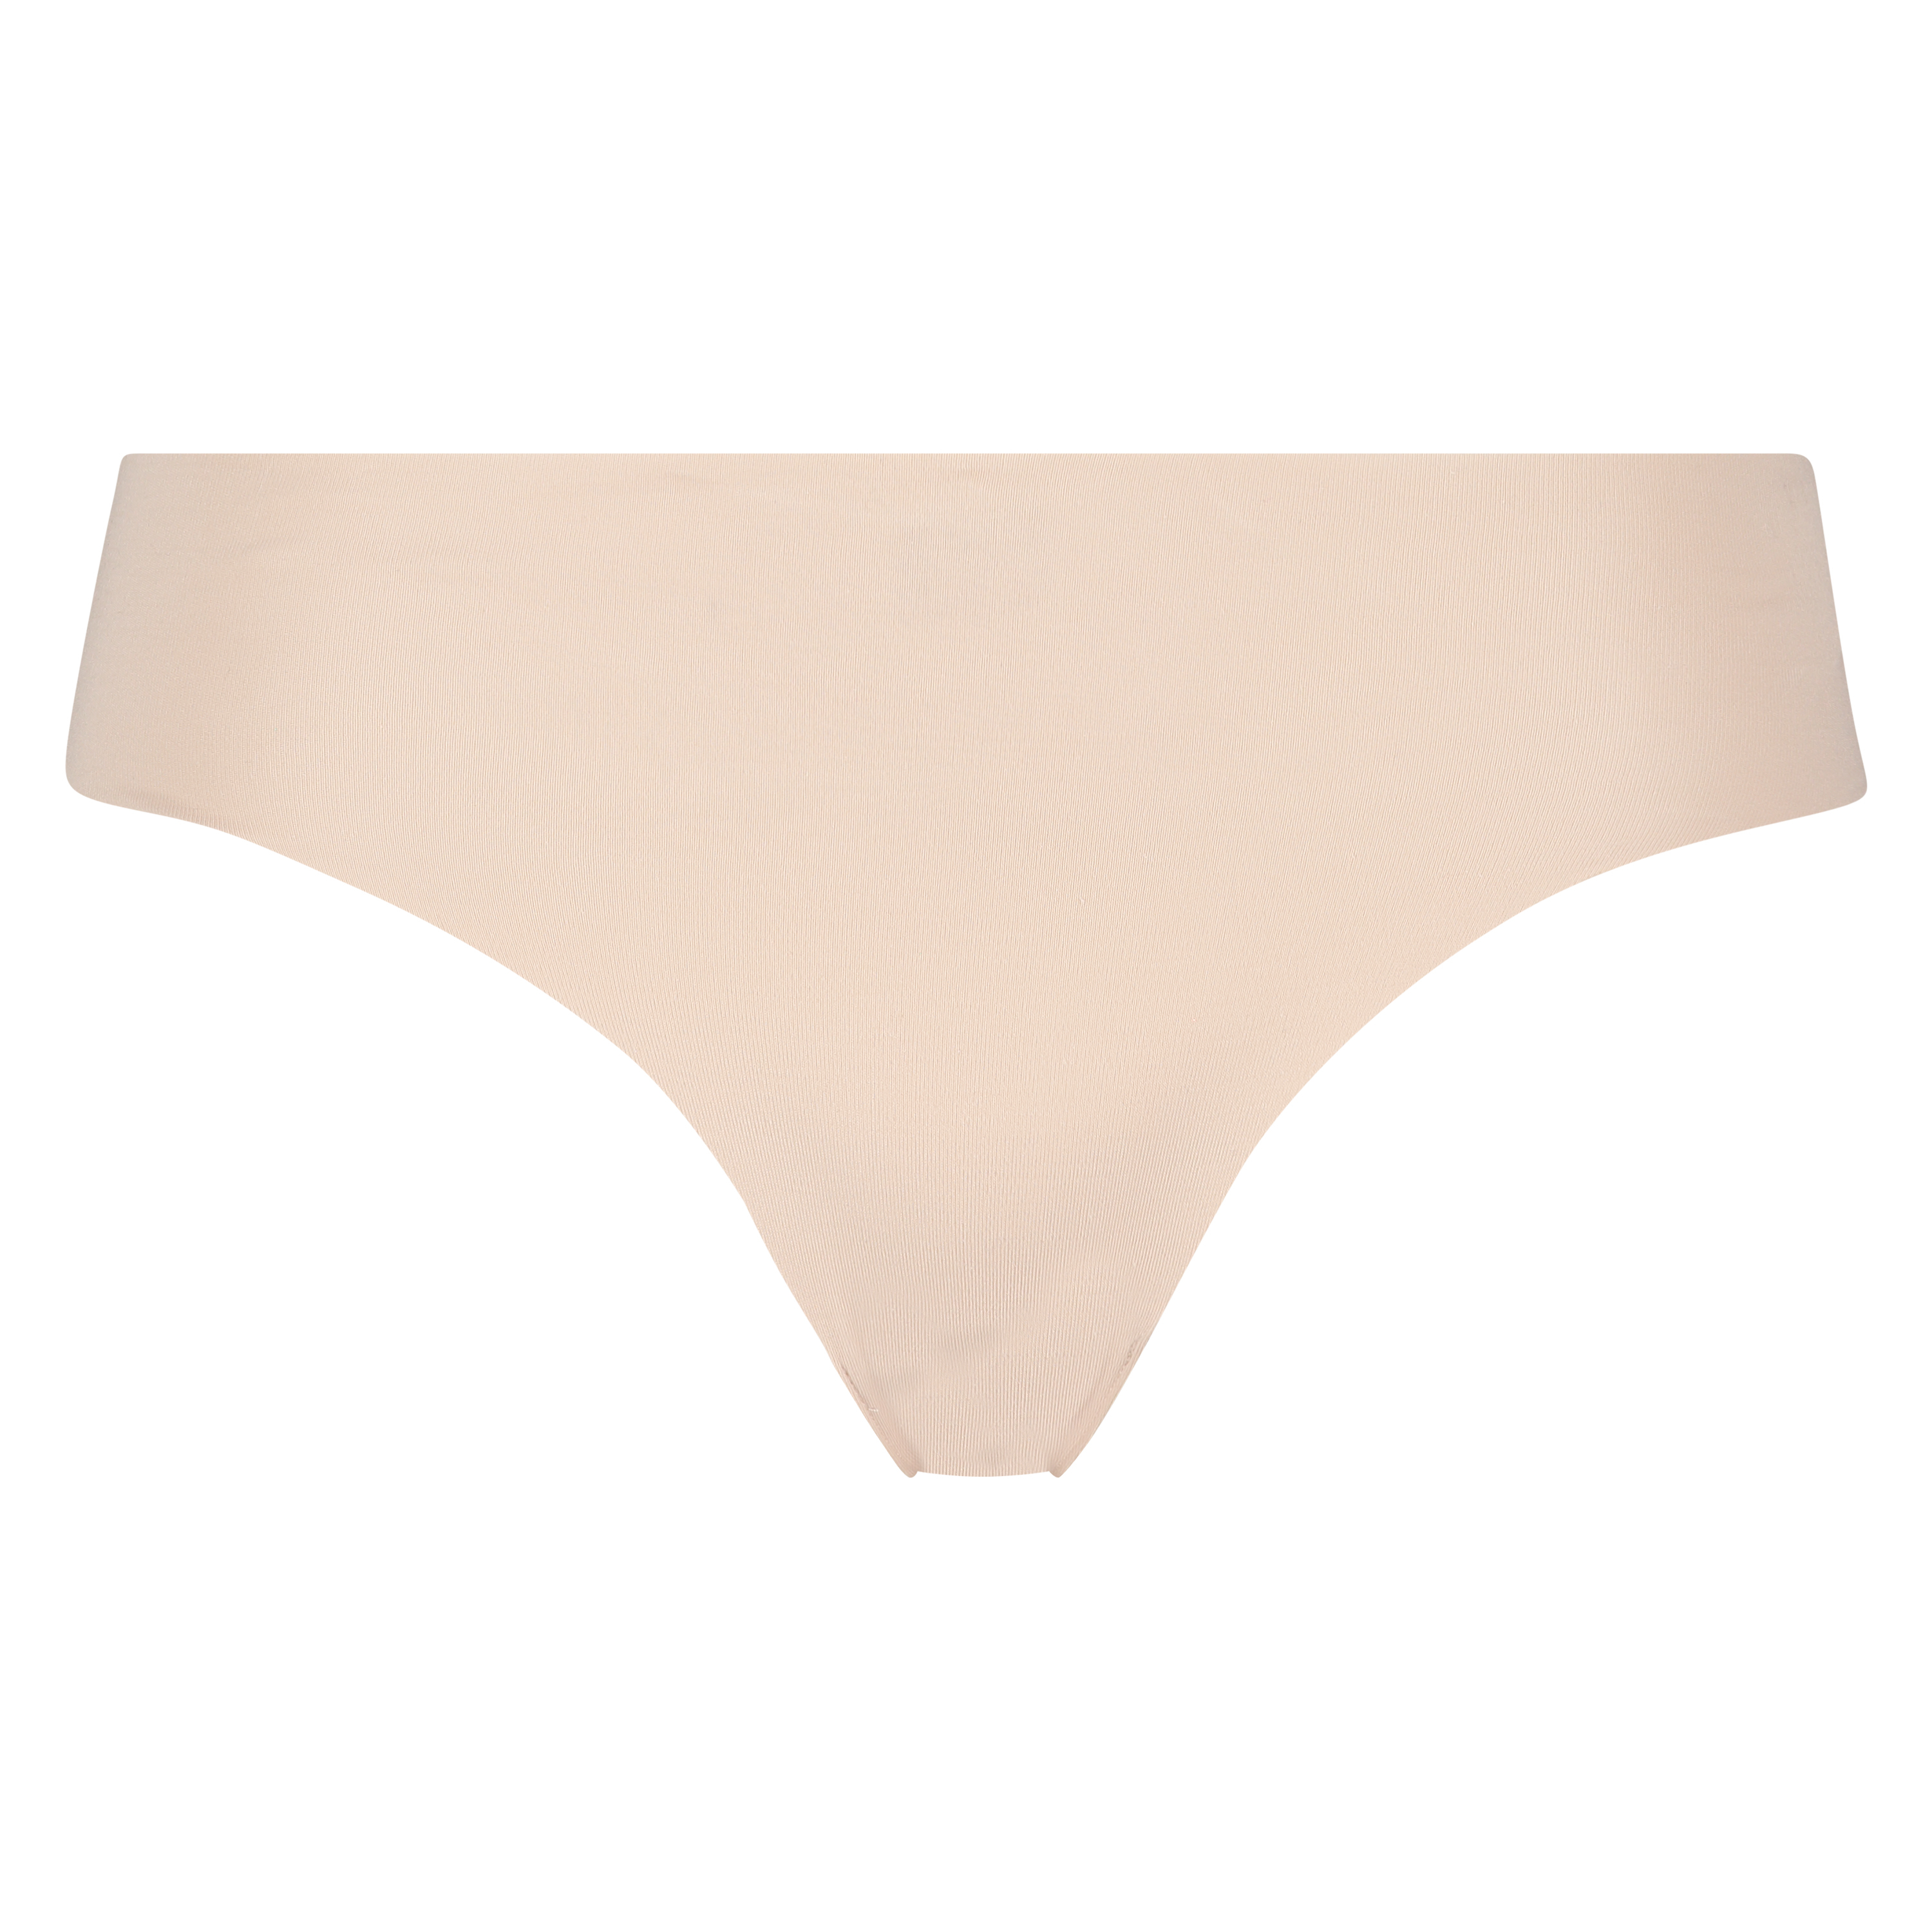 Invisible cotton Brazilian for £7 - New Arrivals - Hunkemöller